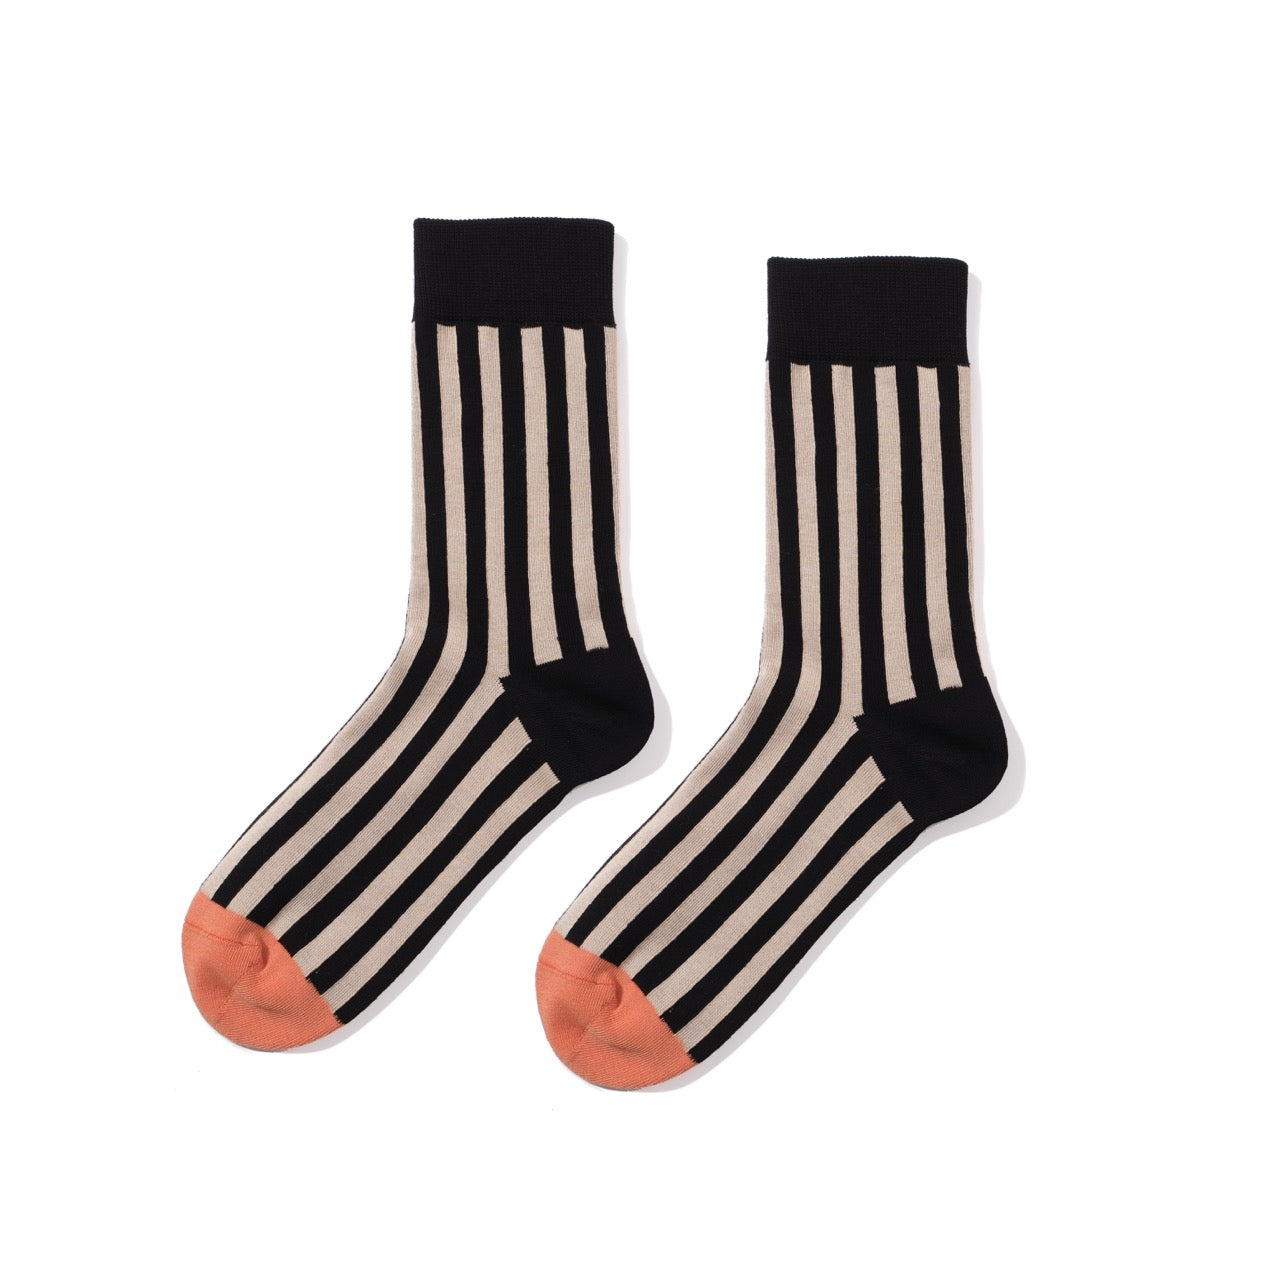 VERTICAL STRIPED STOCKINGS  Striped stockings, Stockings, Vertical stripes